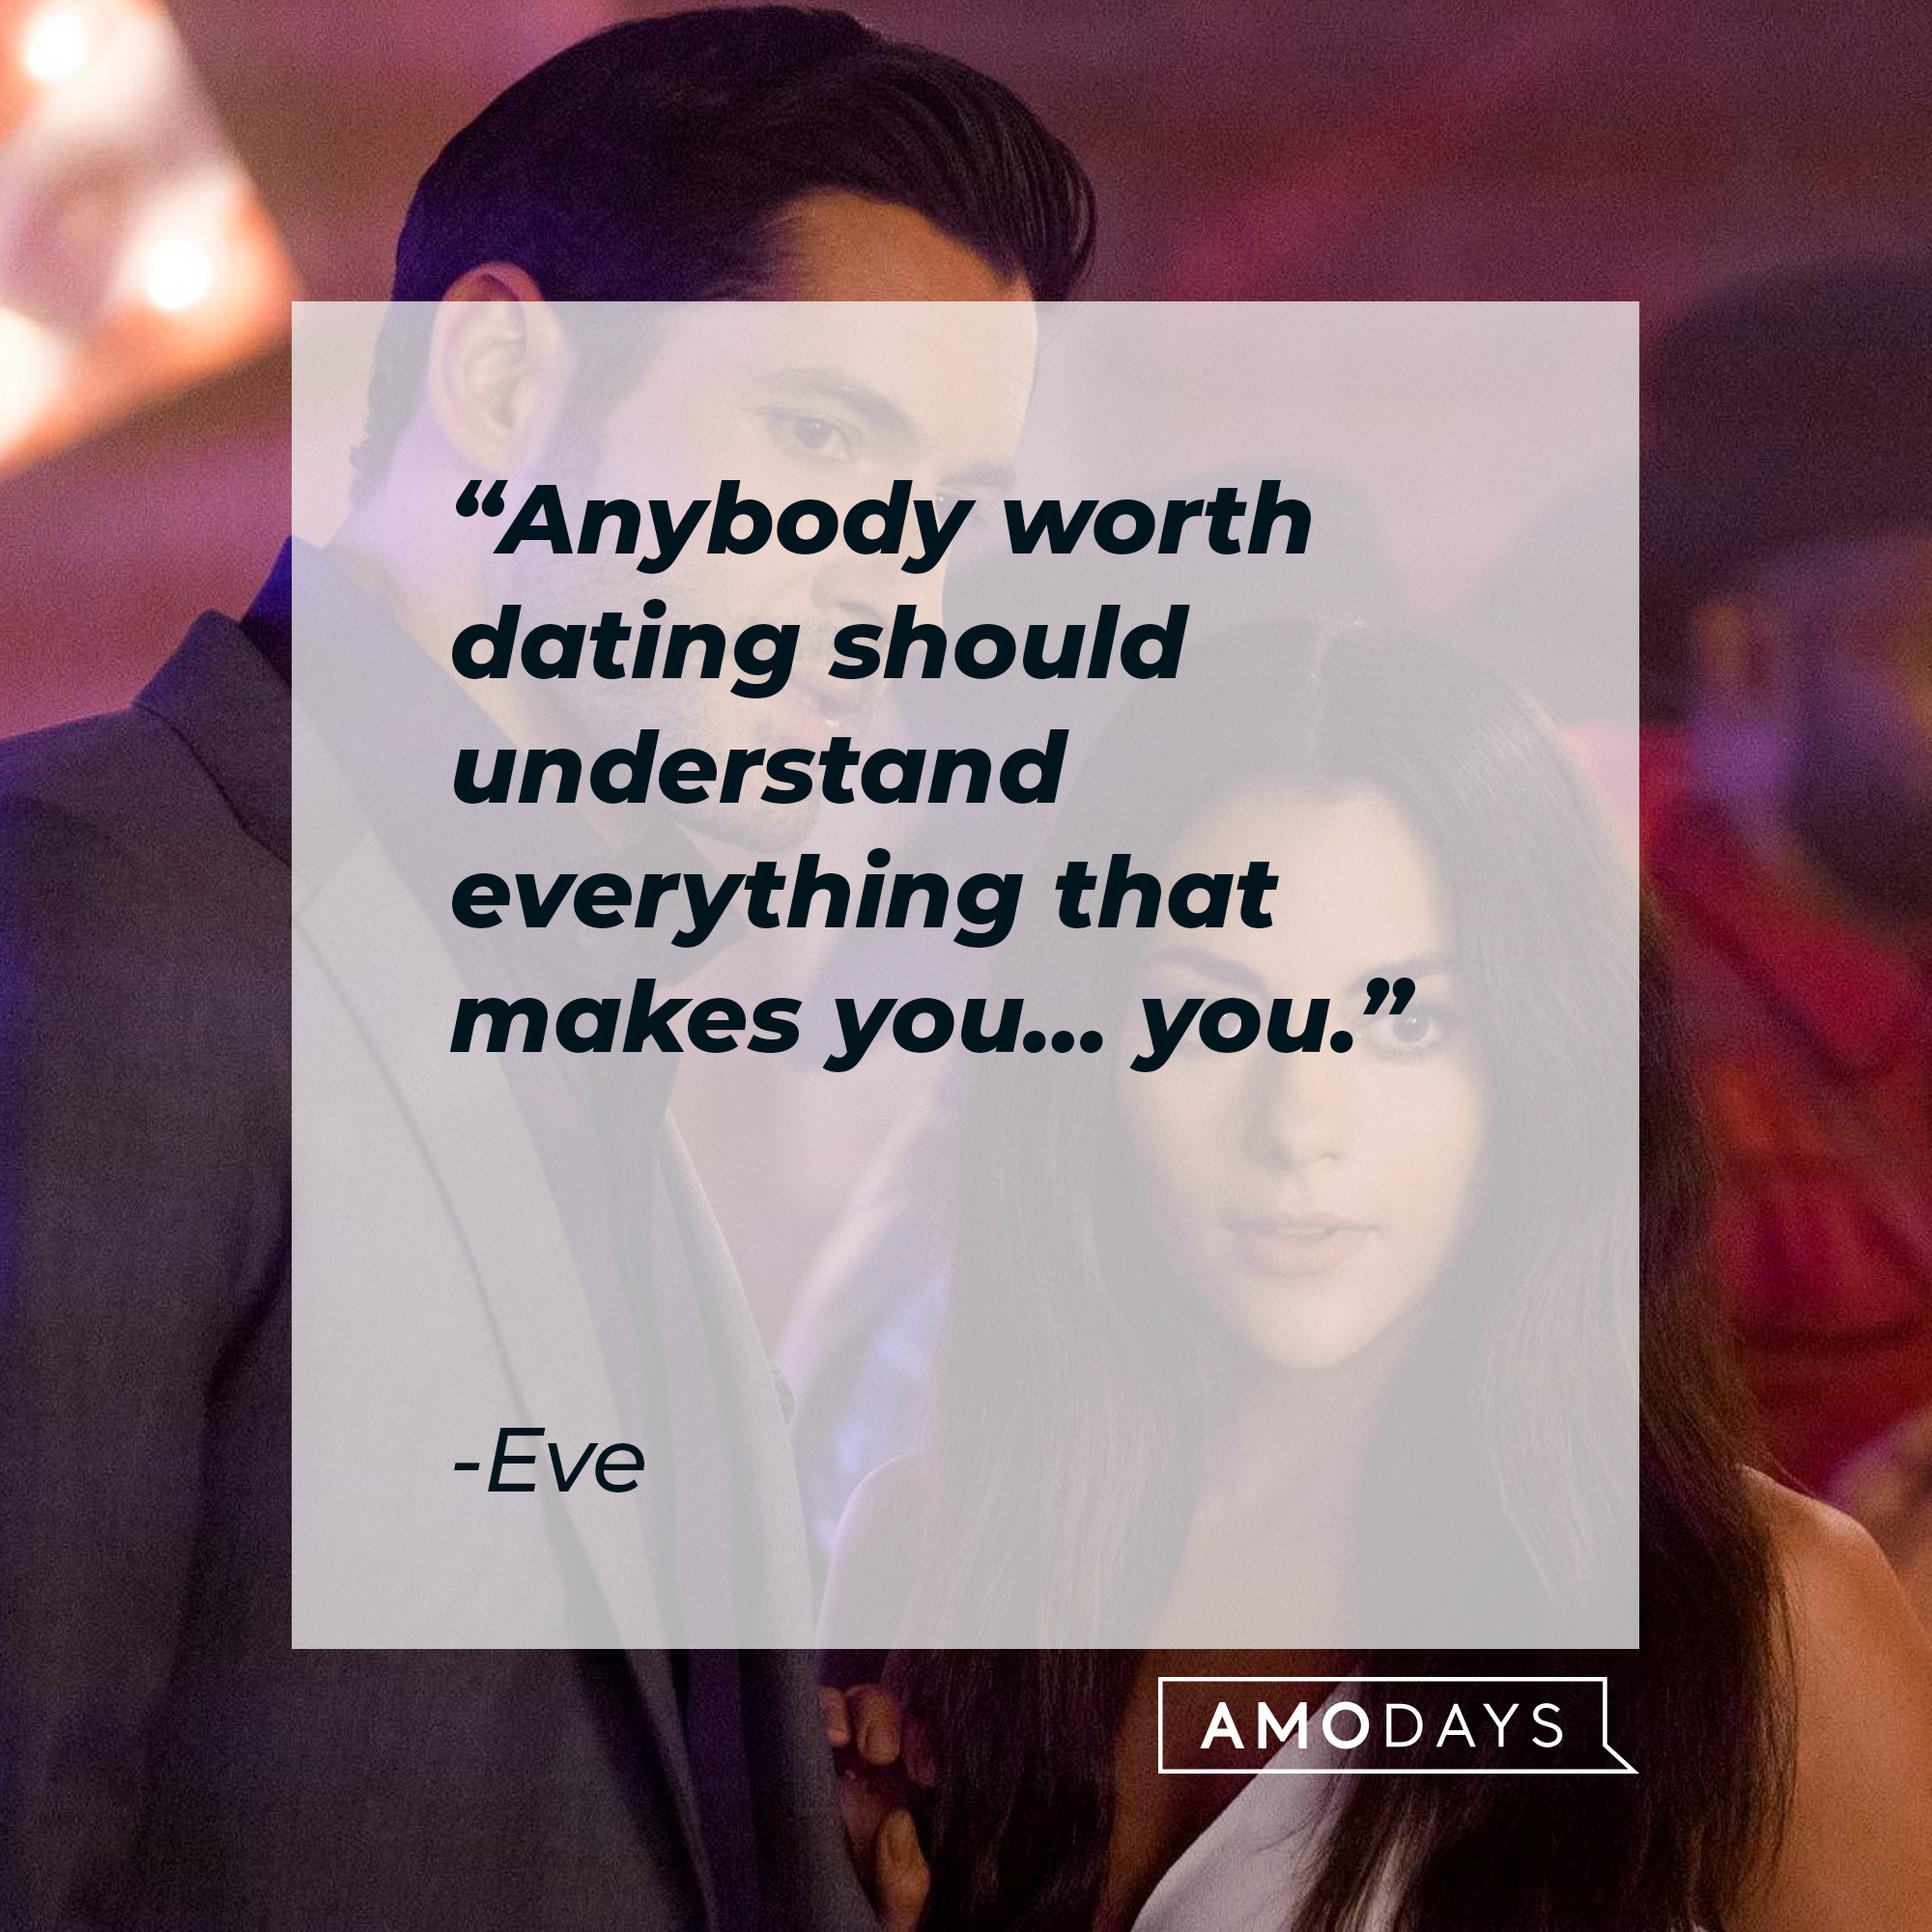 Eve’s quote: "Anybody worth dating should understand everything that makes you… you." | Source: Facebook.com/LuciferNetflix